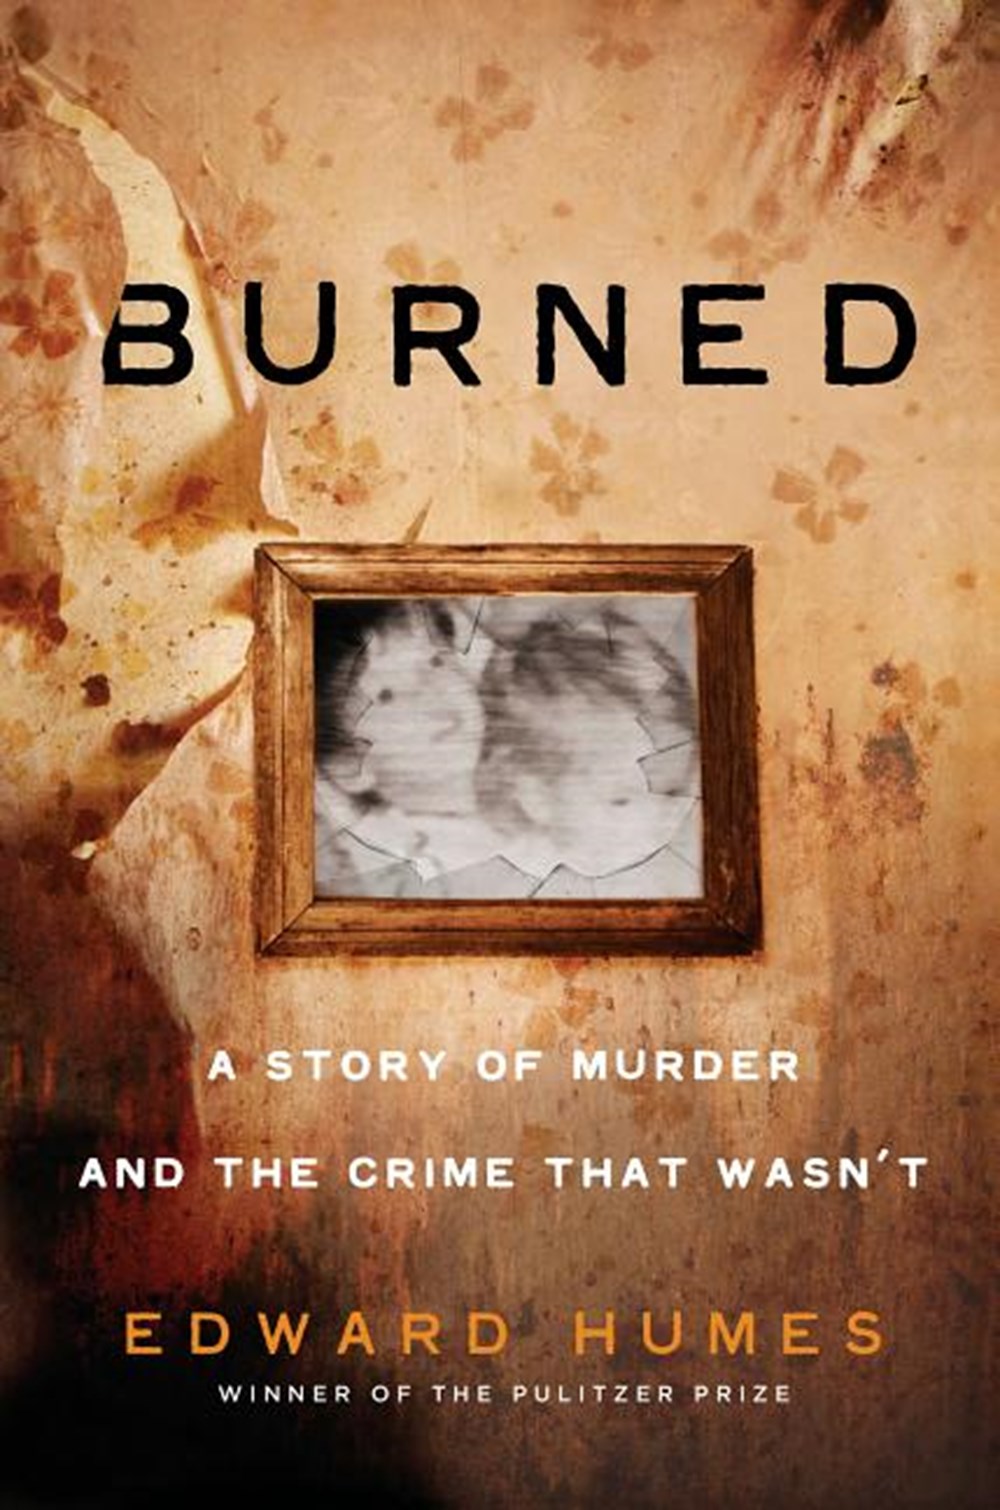 Burned A Story of Murder and the Crime That Wasn't